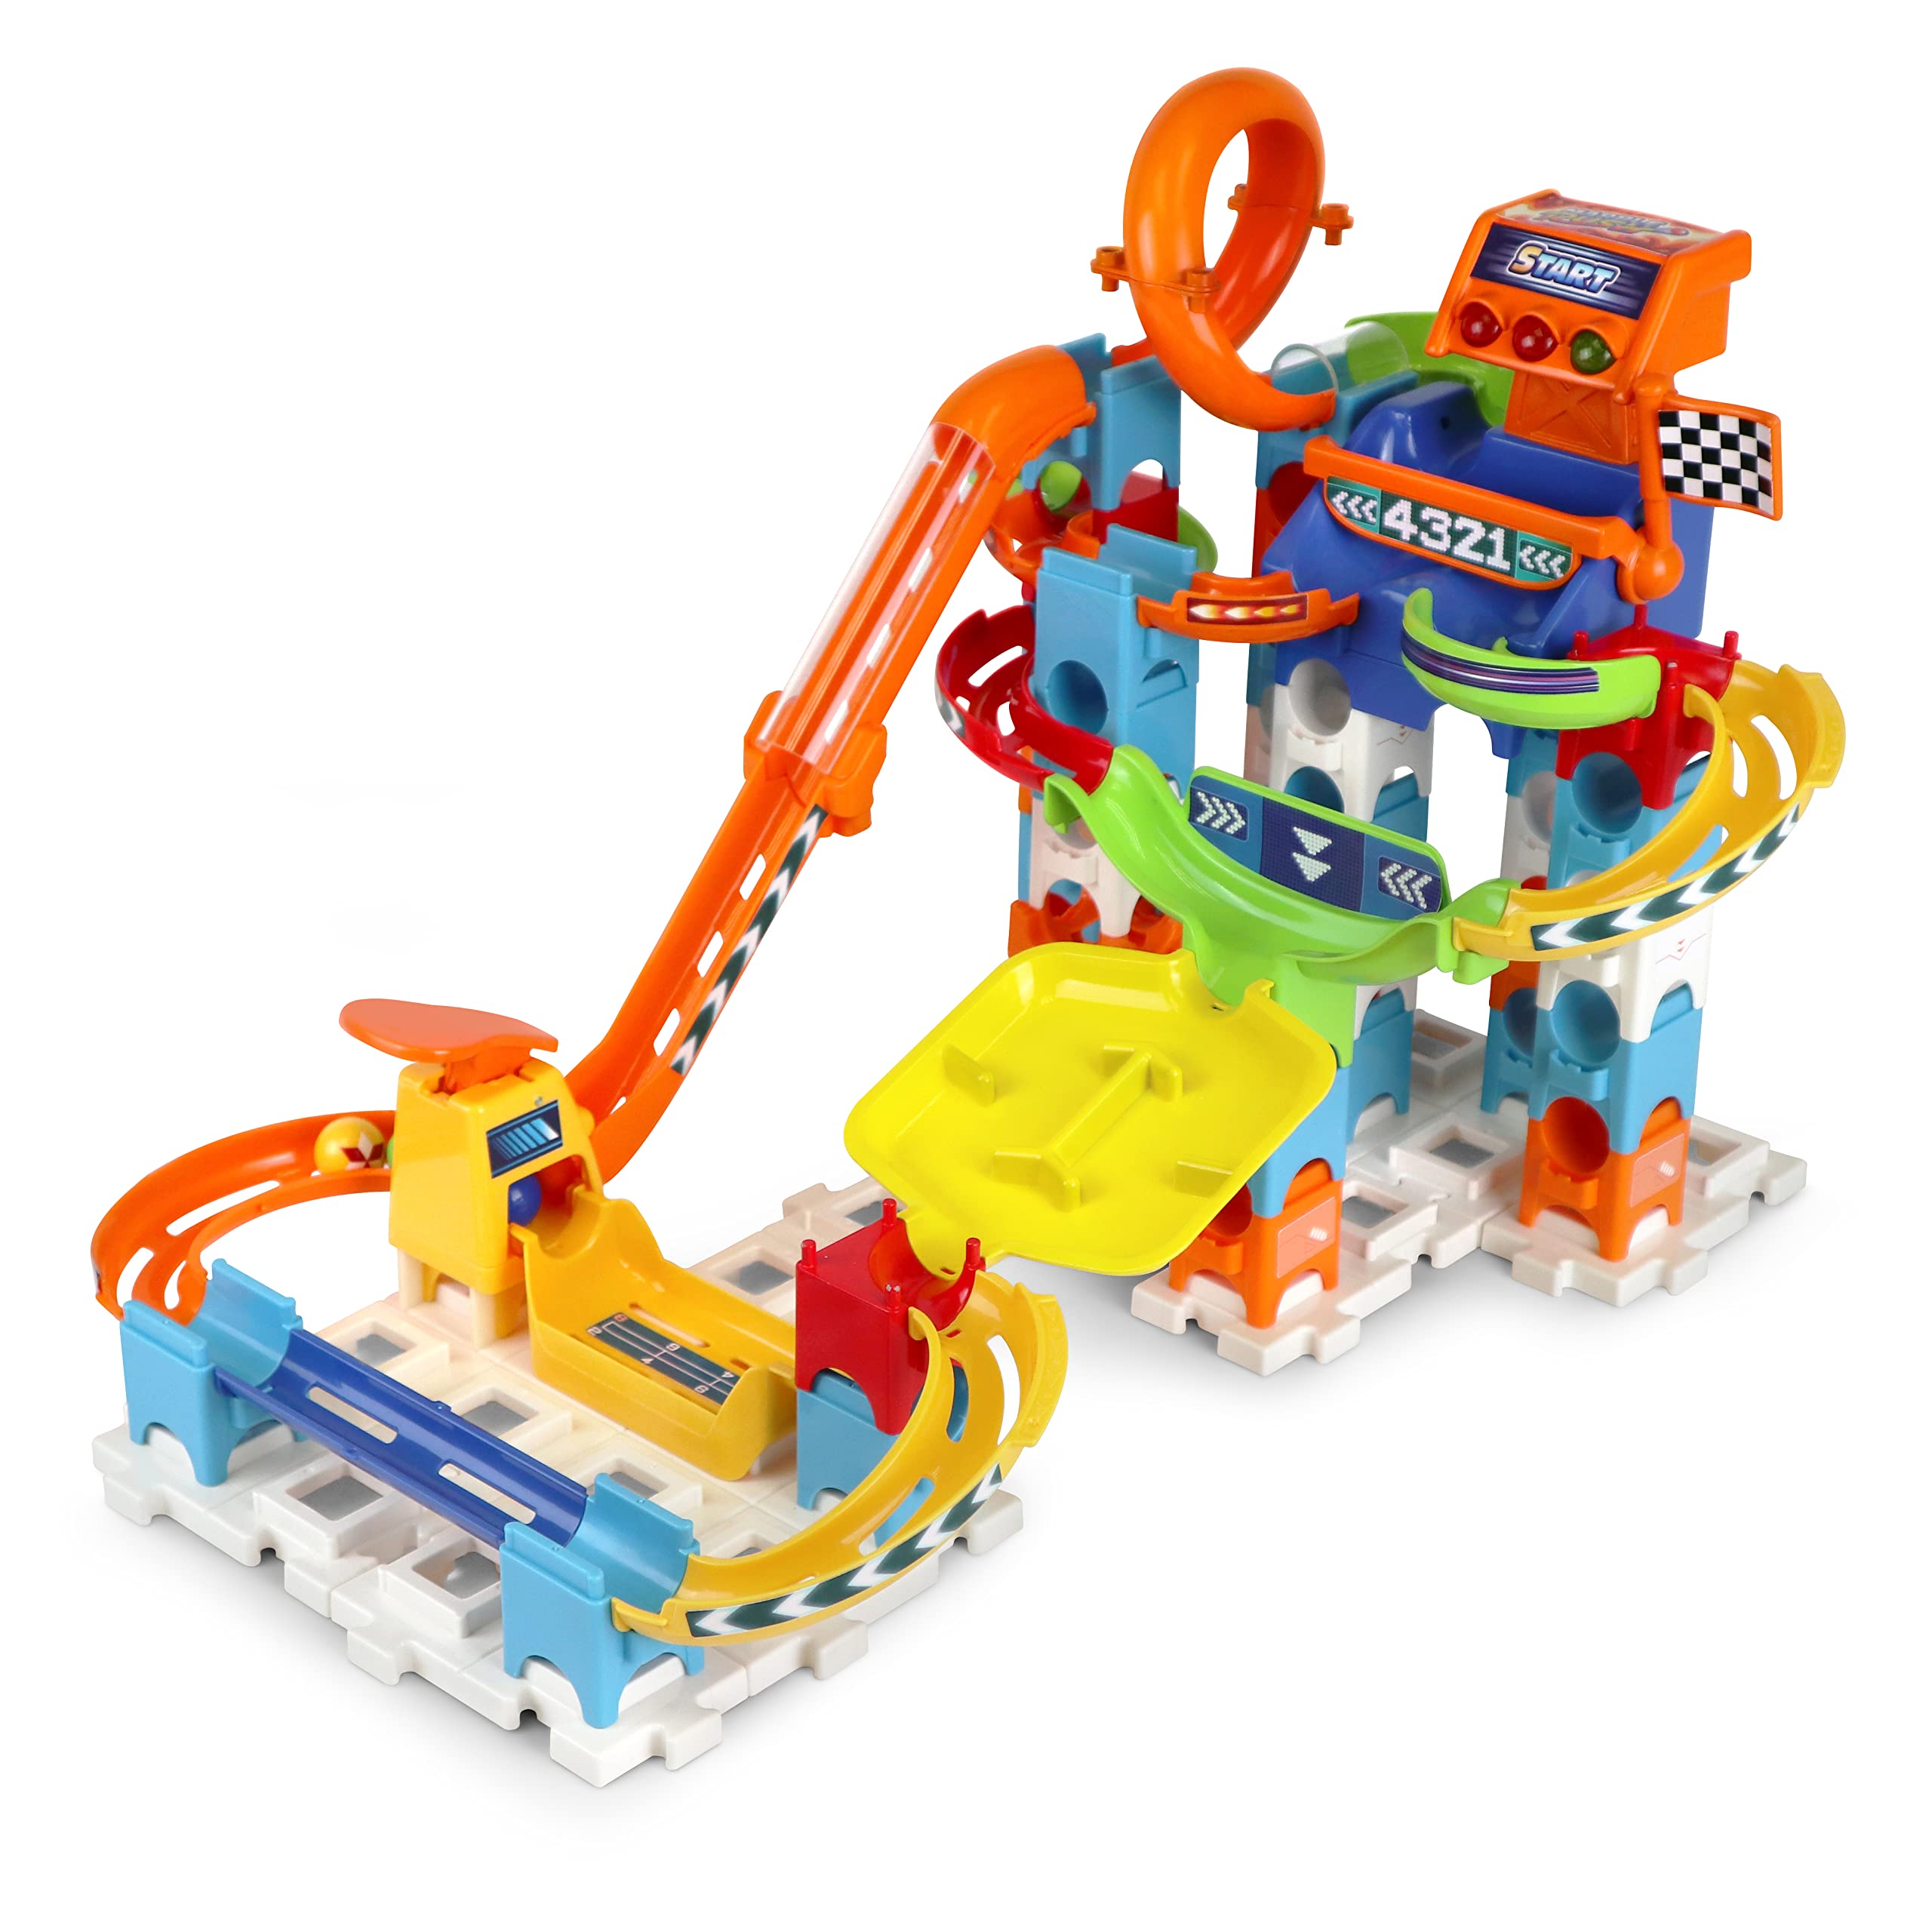 VTech - Marble Rush Racing Track Set Interactive Marble Circuit Building Toy for Children 4 Years Old Spanish Version 送